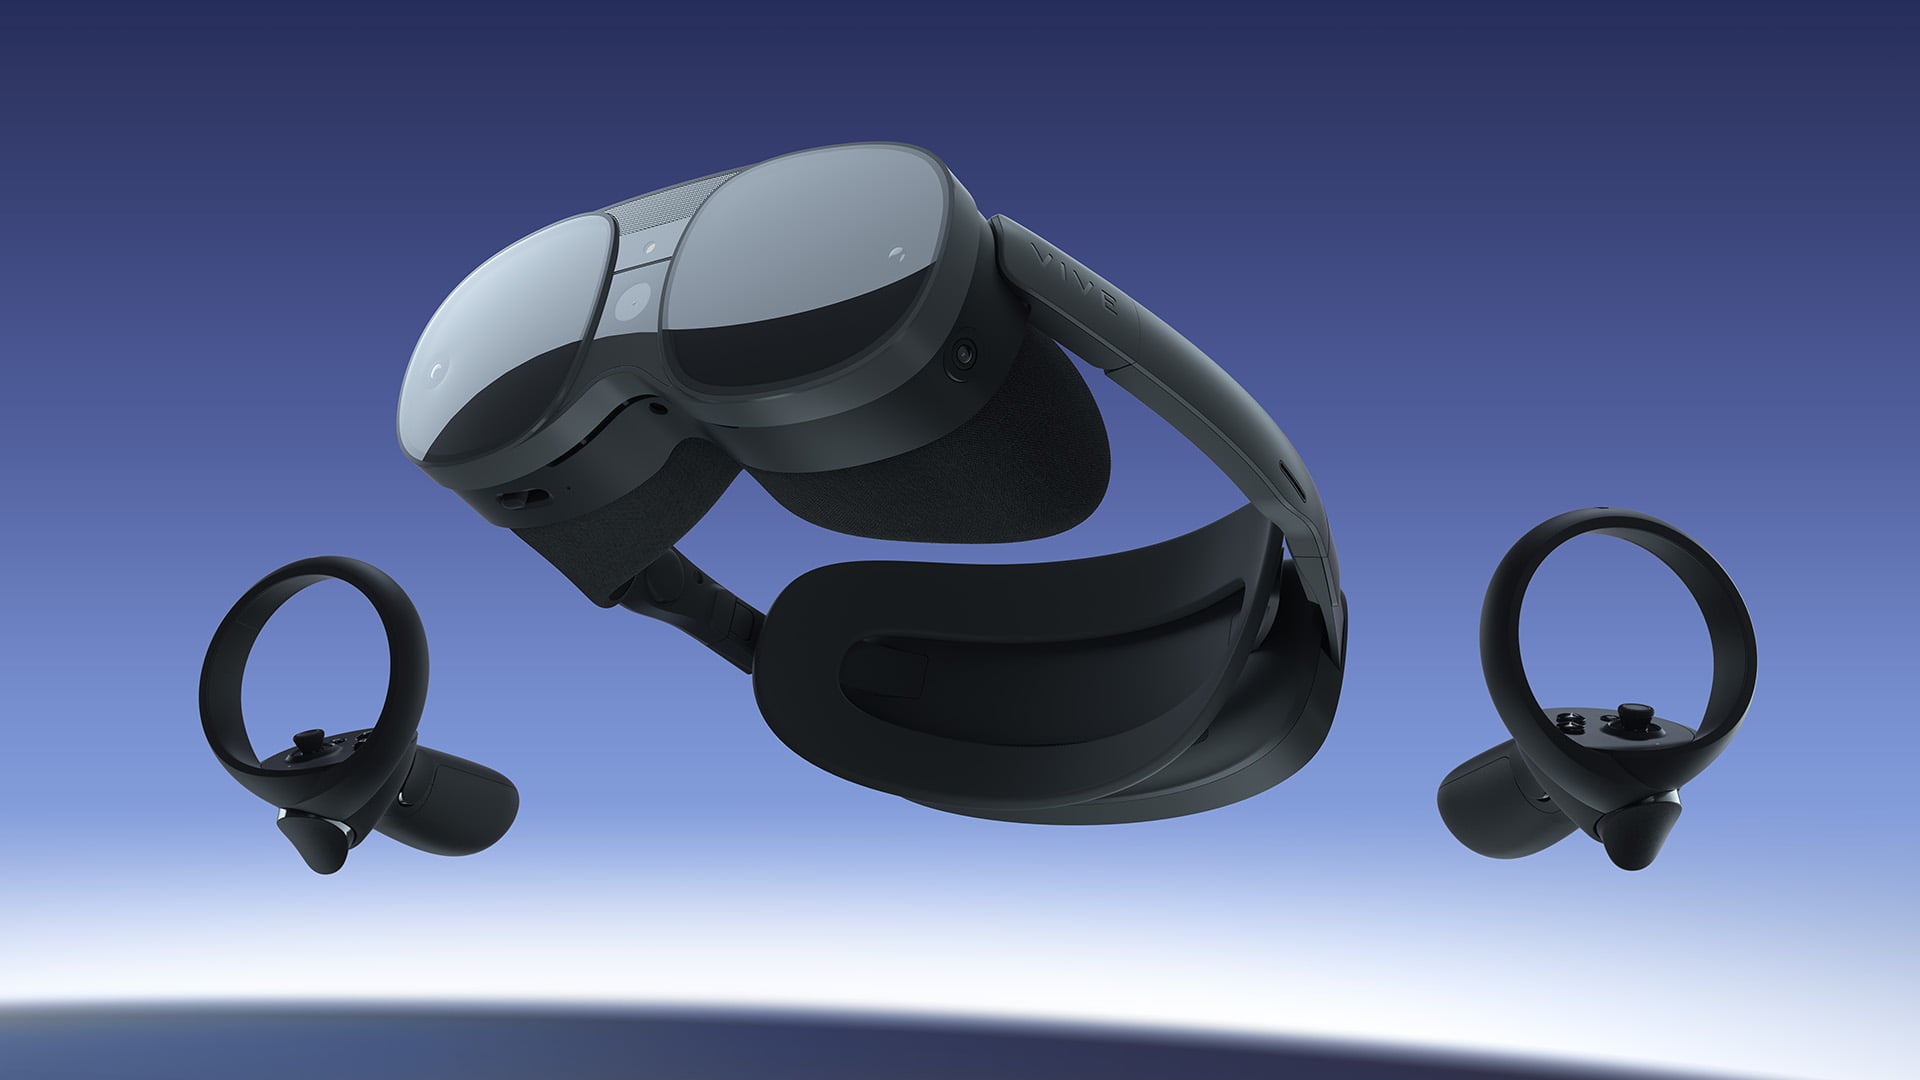 Vive XR Elite: This is HTC’s new mixed reality headset